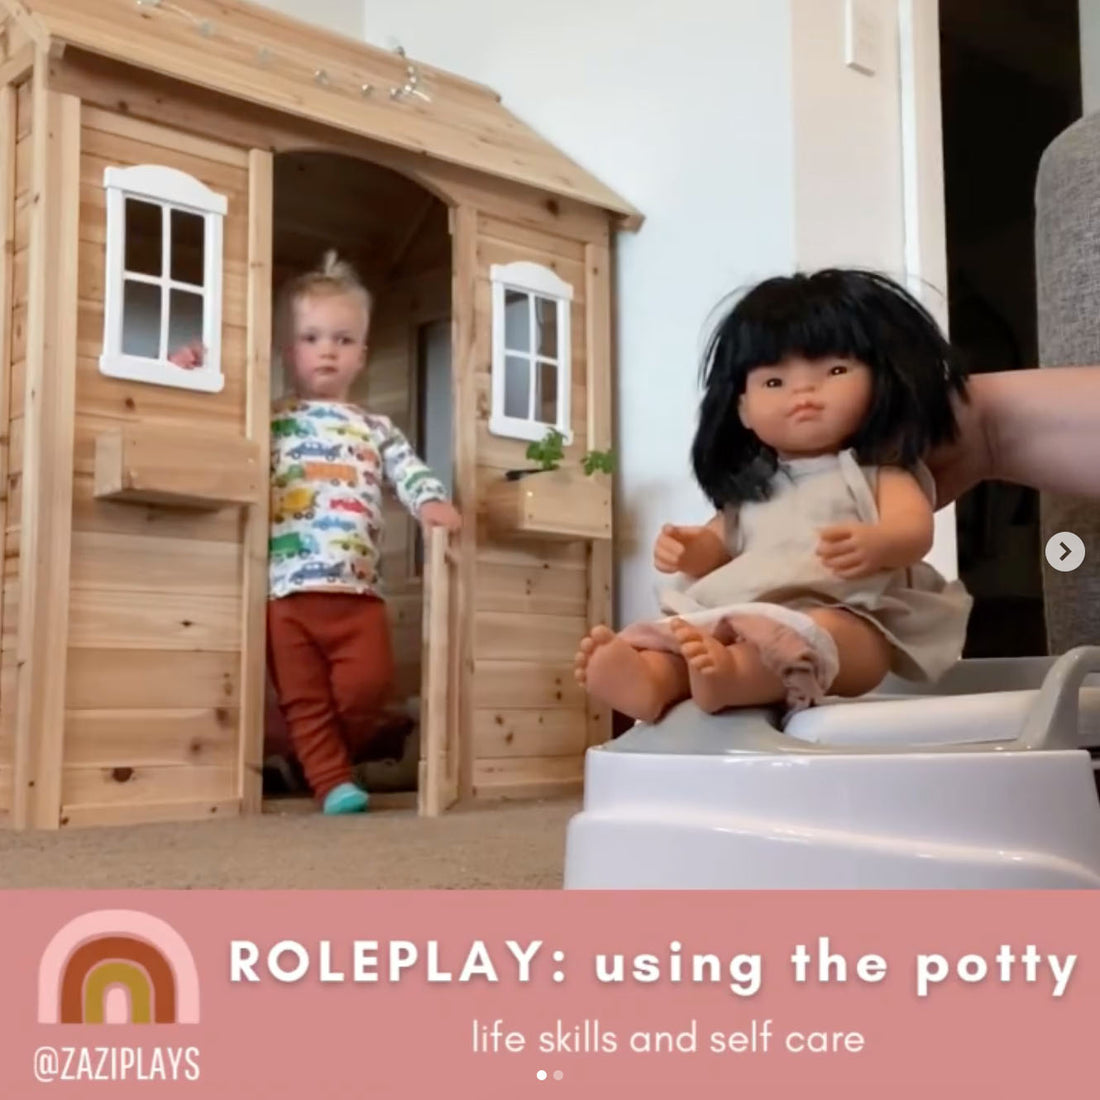 Roleplay: Using the Potty